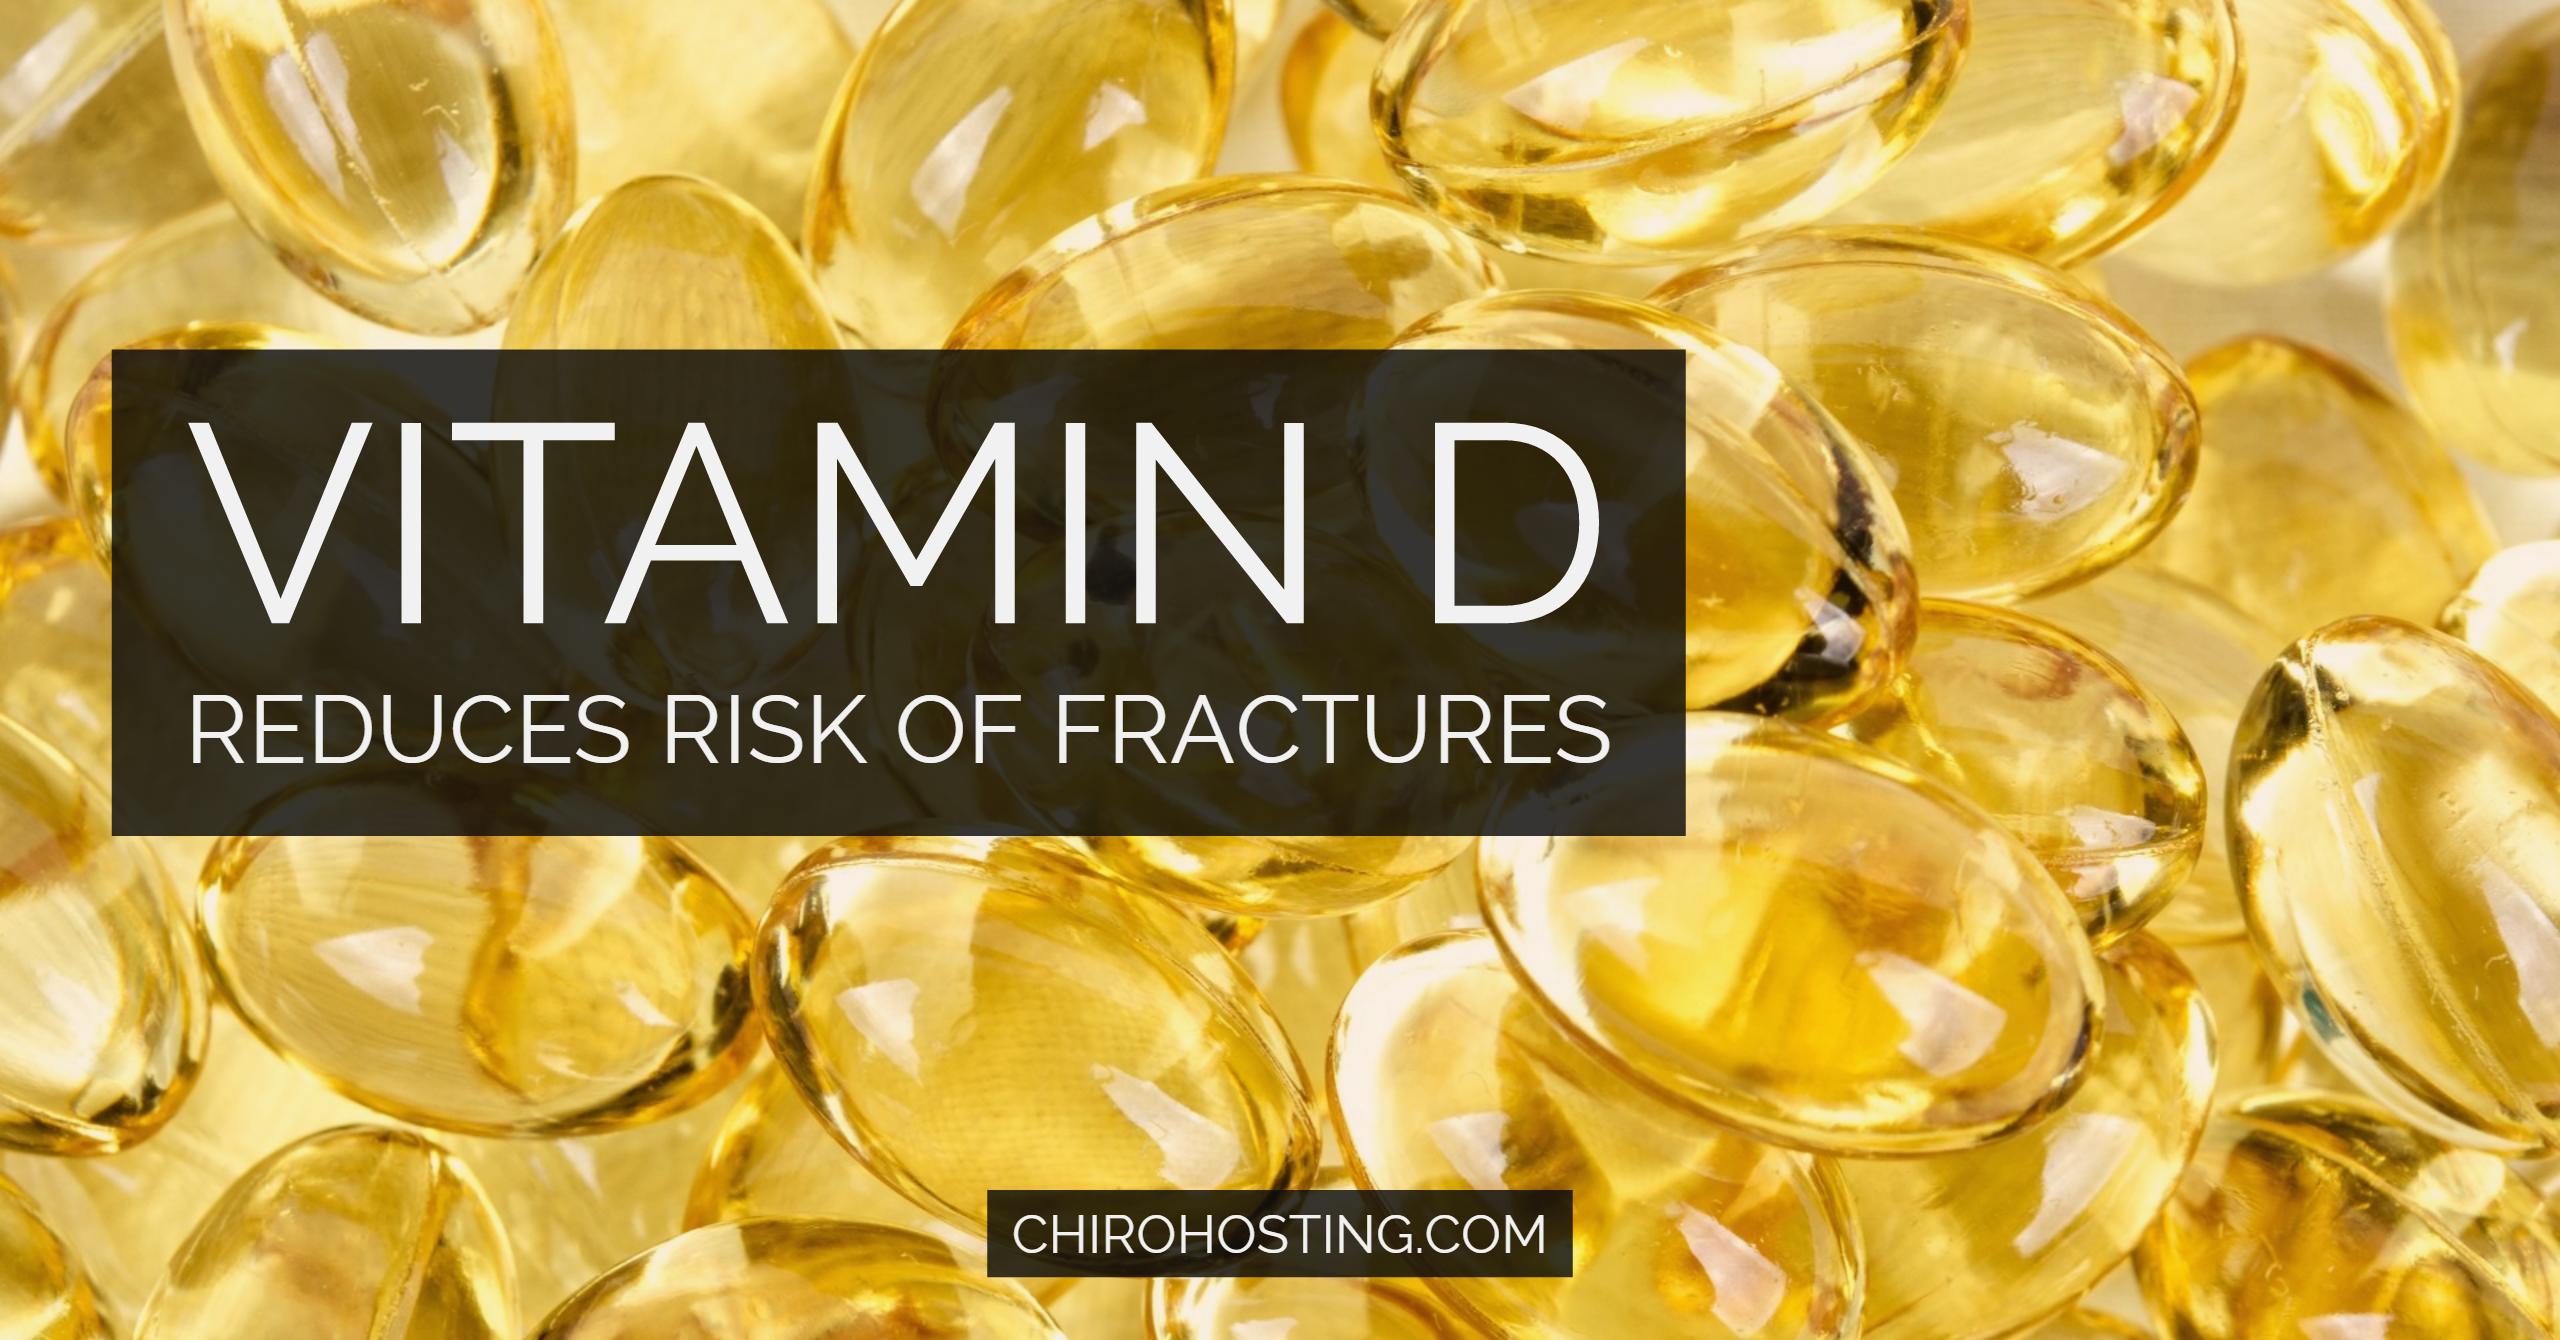 Vitamin D Reduces Risk of Fractures